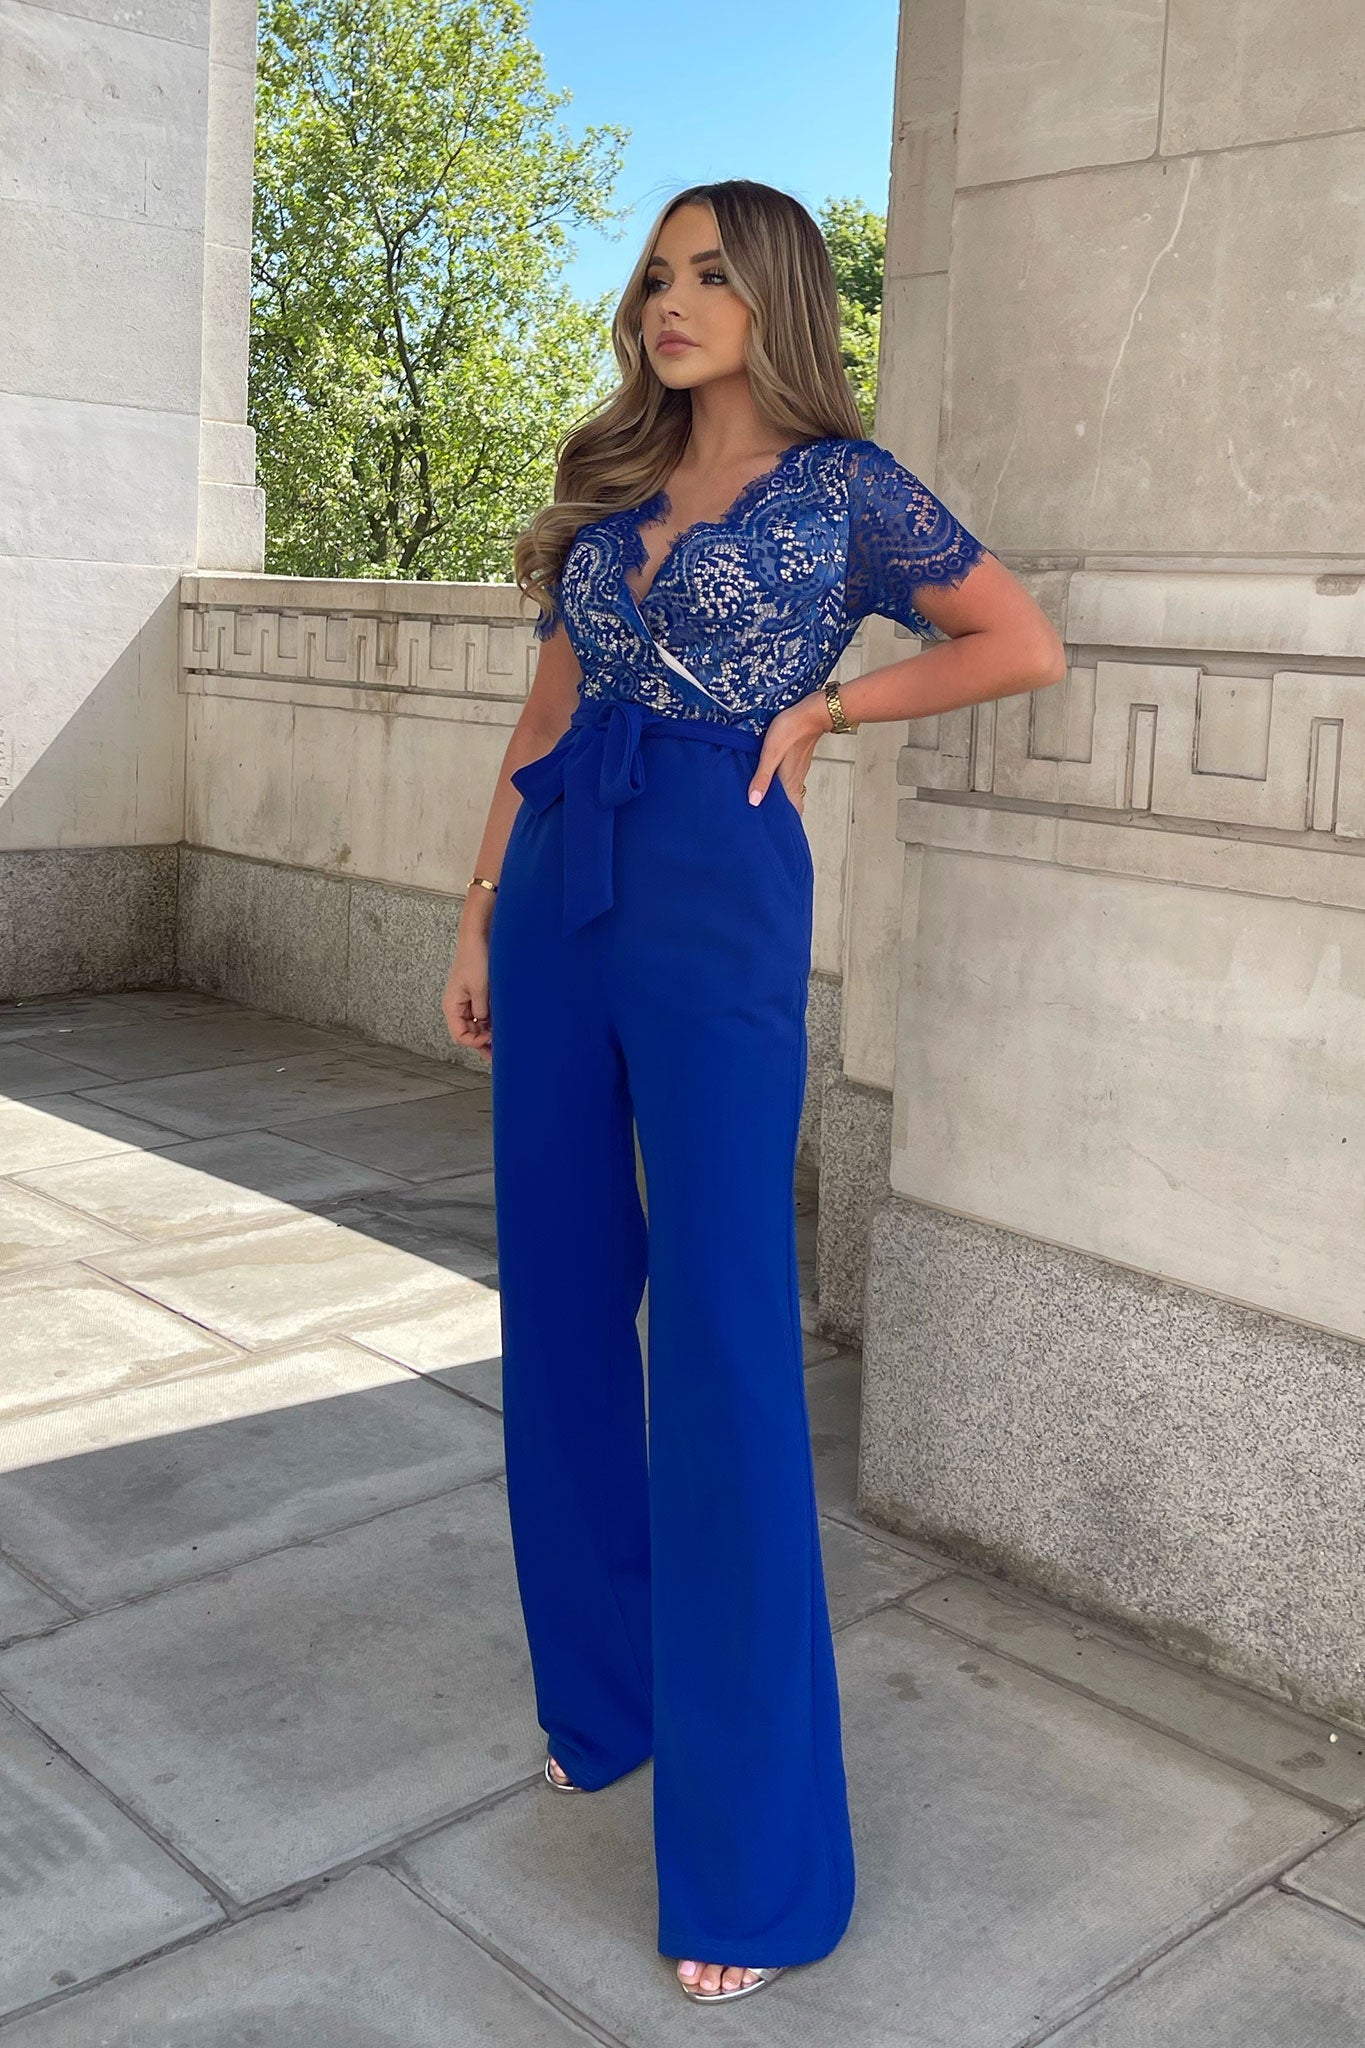 Julia Cobalt Lace Wrap Wide Leg Jumpsuit By Girl In Mind Was